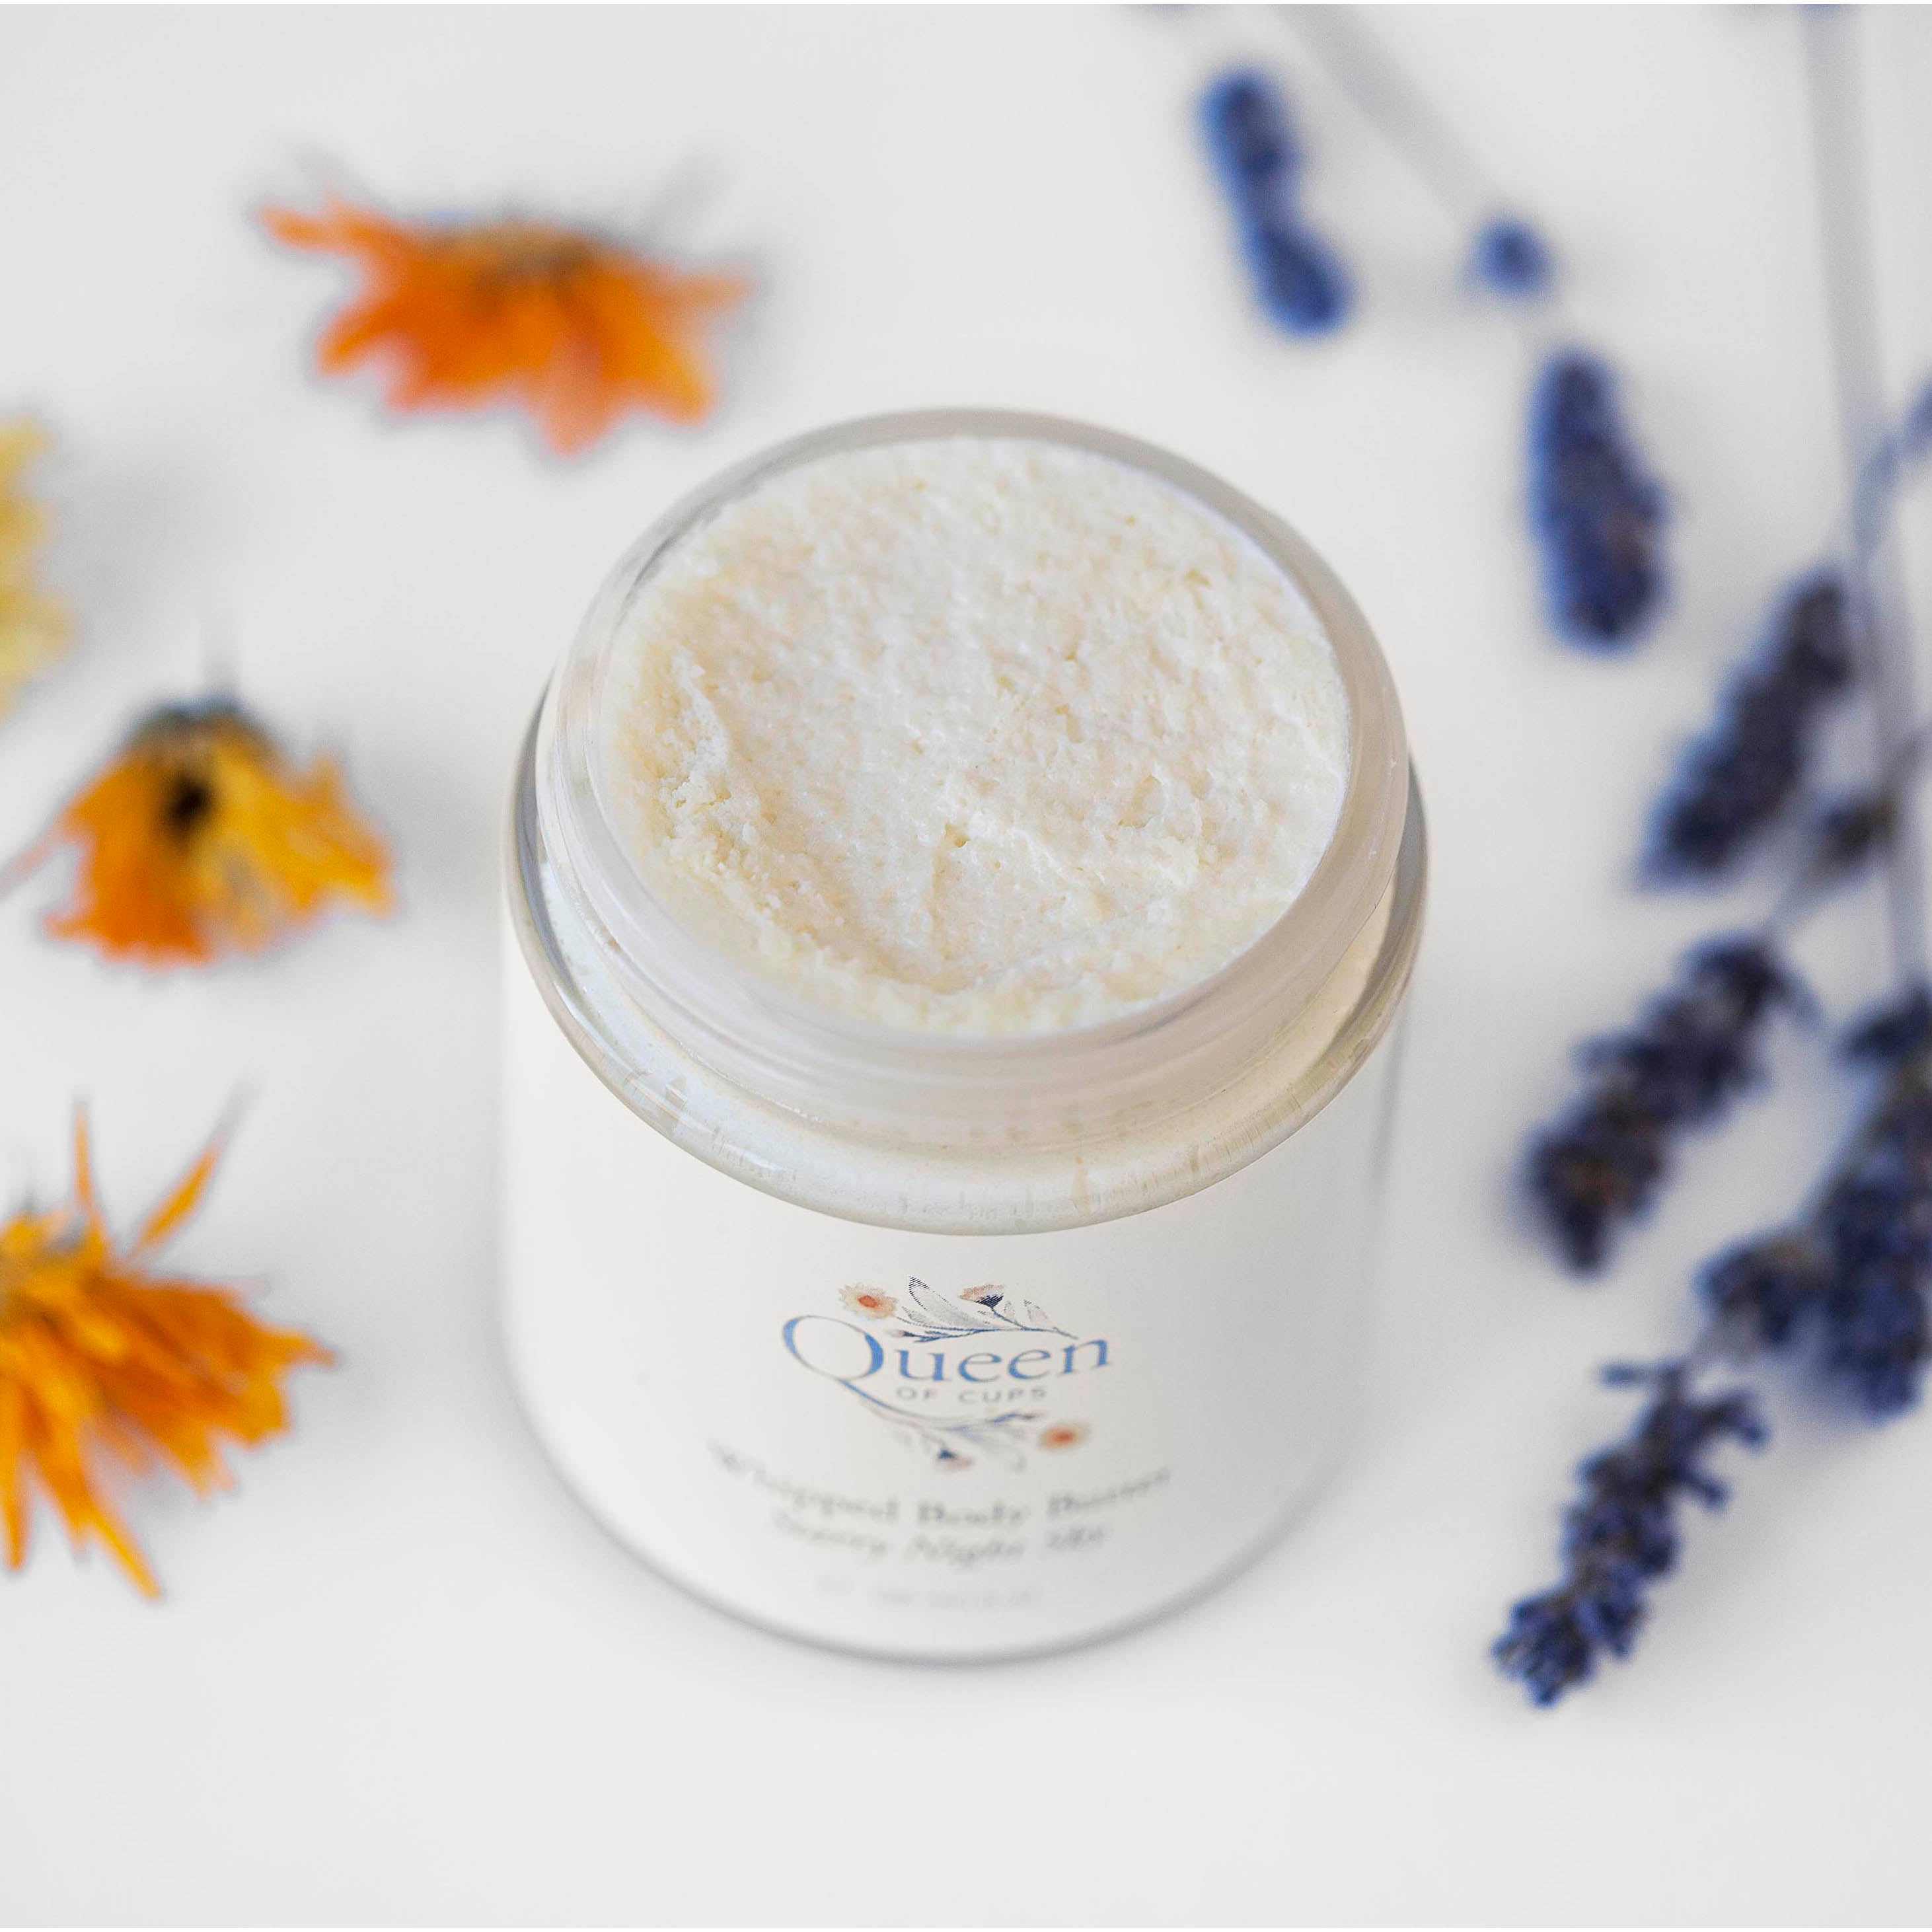 open-whipped-body-butter-with-laveneder-calendula-flowers_3ecb2592-0246-430d-9e28-a4a506601c46.jpg